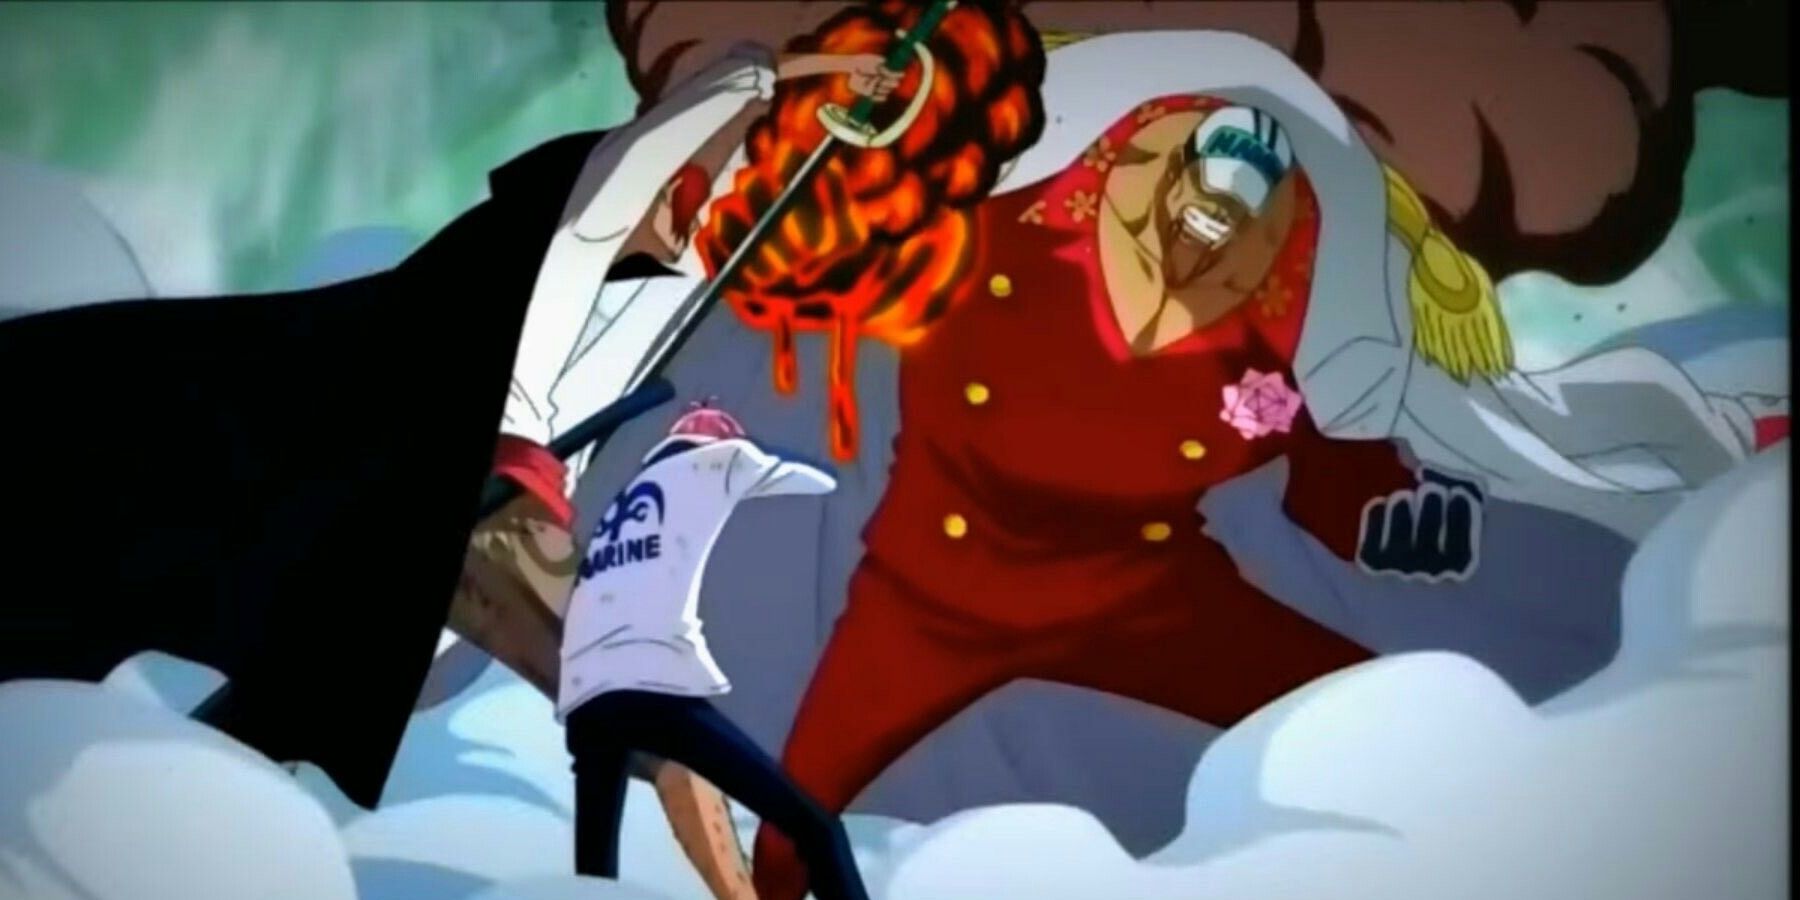 One Piece Shanks stopping Akainu with Griffon